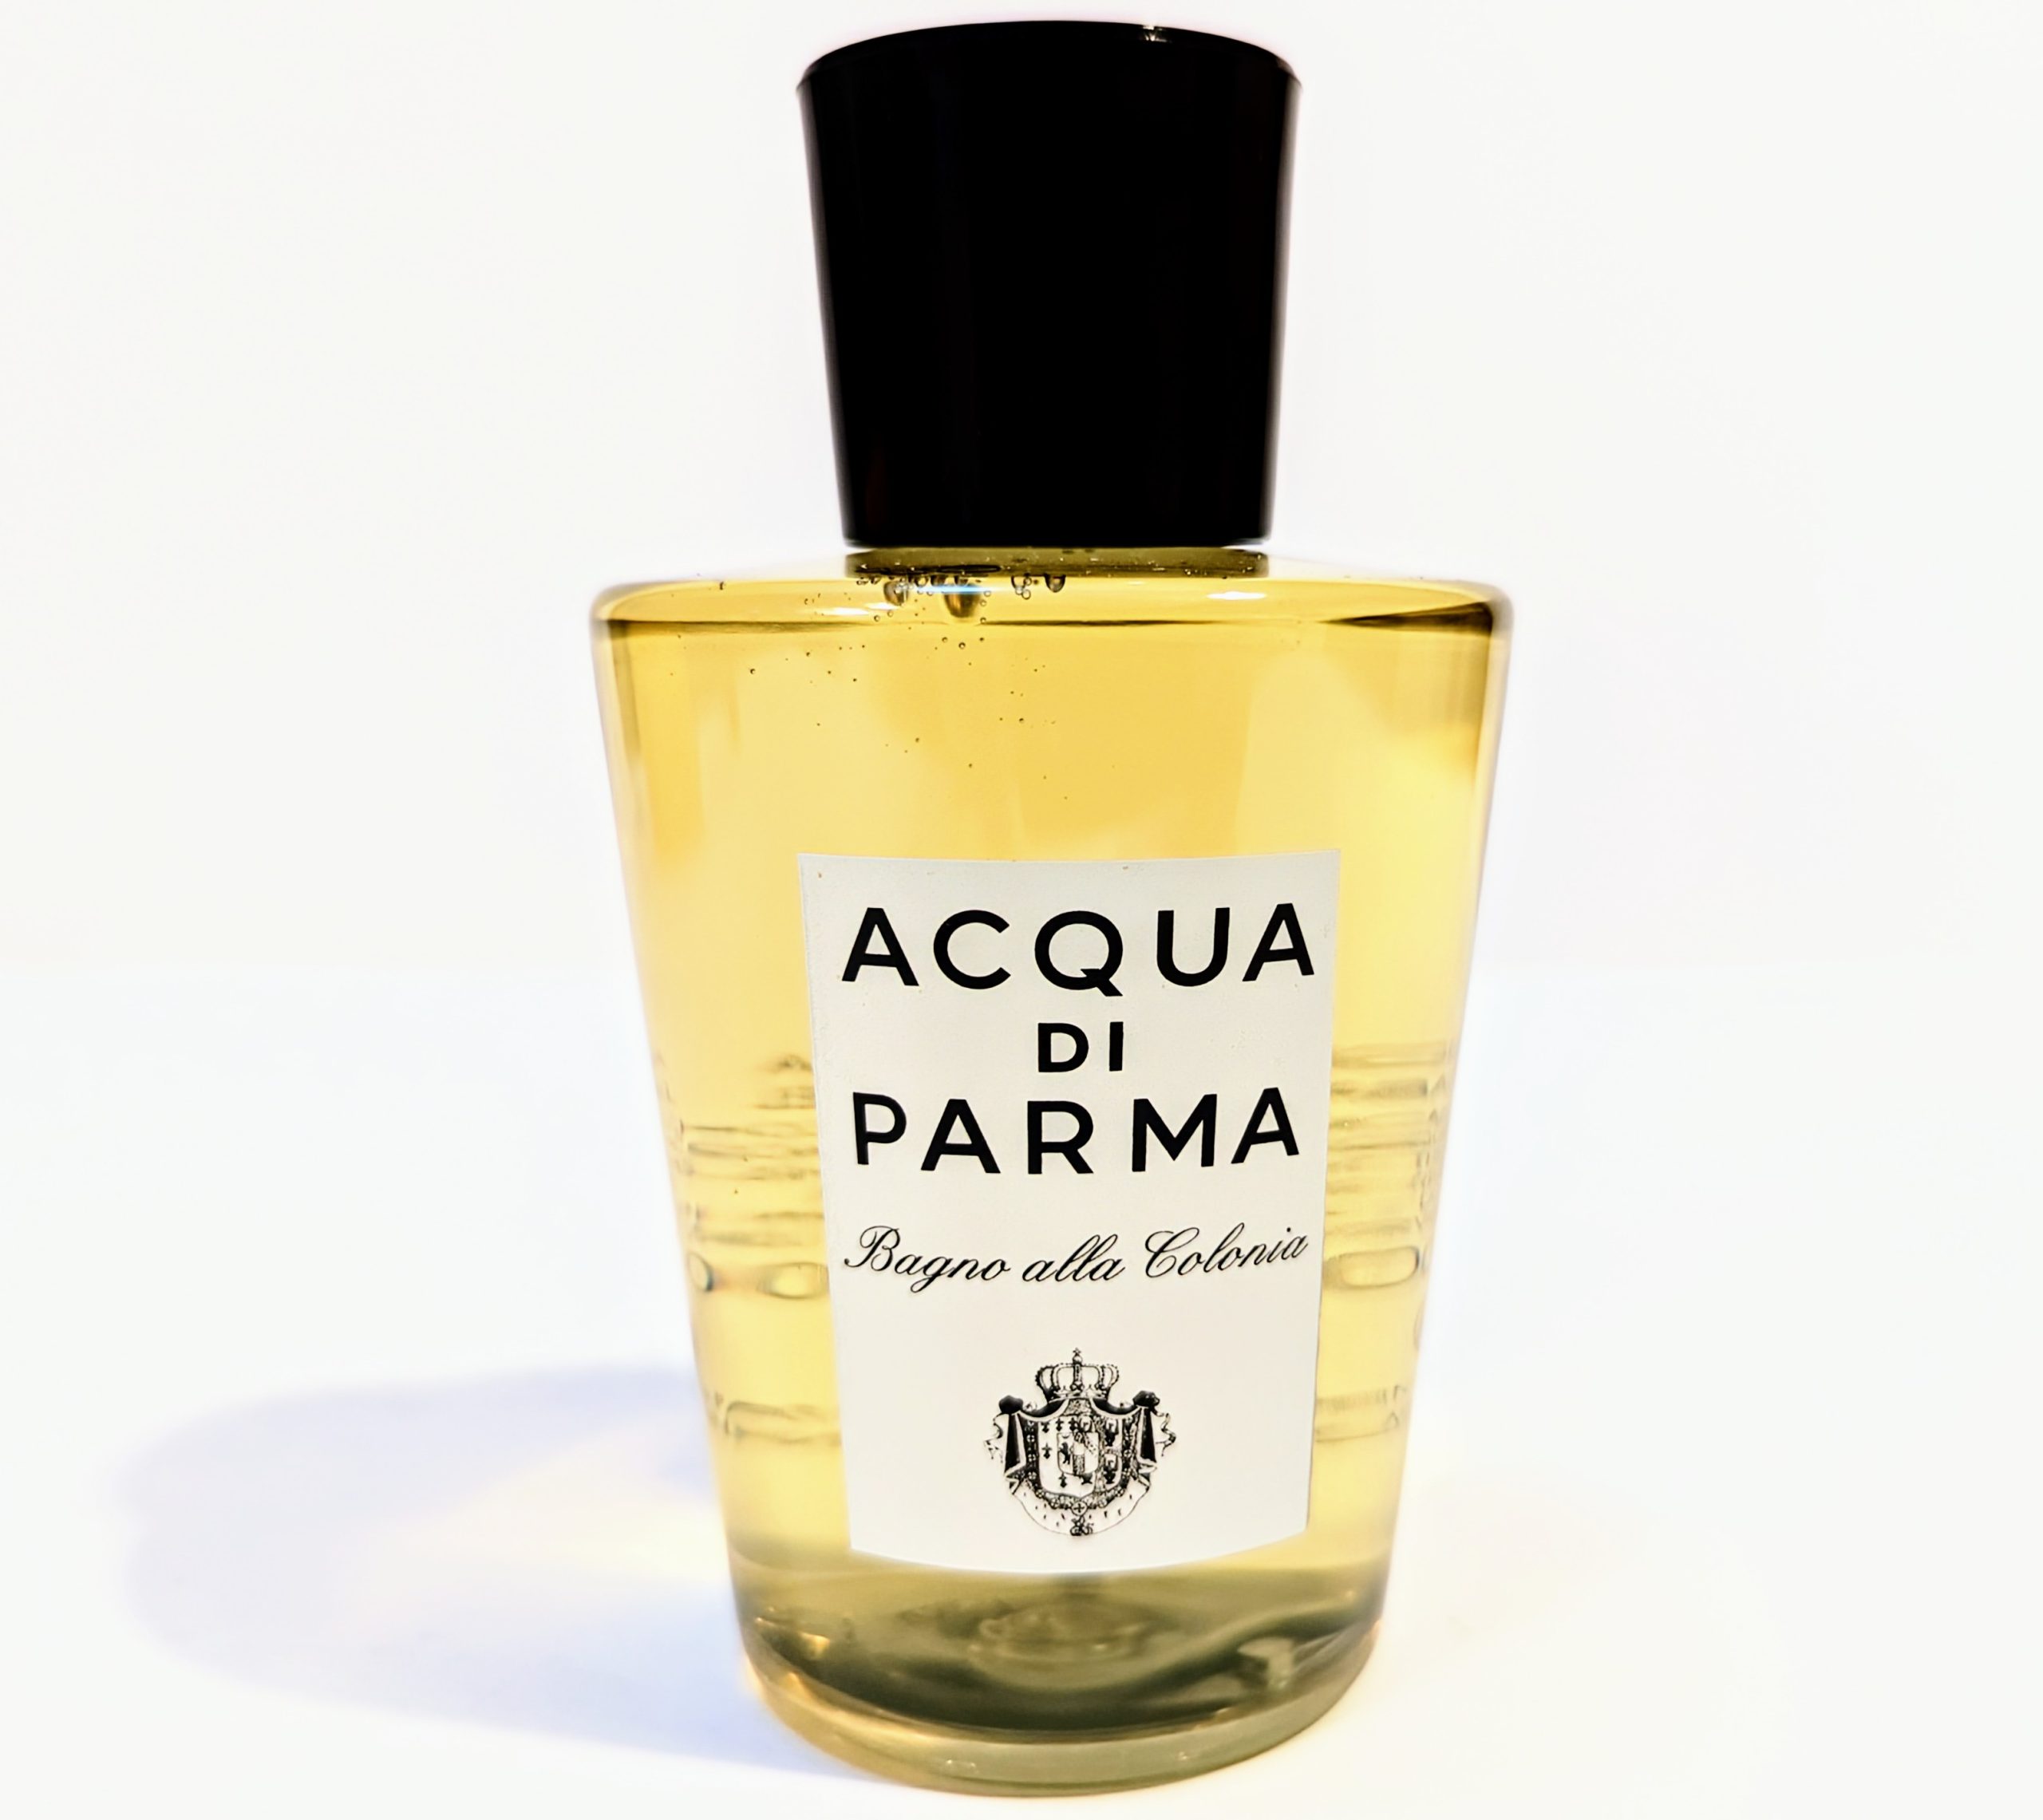 A bottle of Acqua di Parma Bagno alla Colonia is shown, featuring a yellowish liquid and a black cap. The label displays the brand’s name and logo.